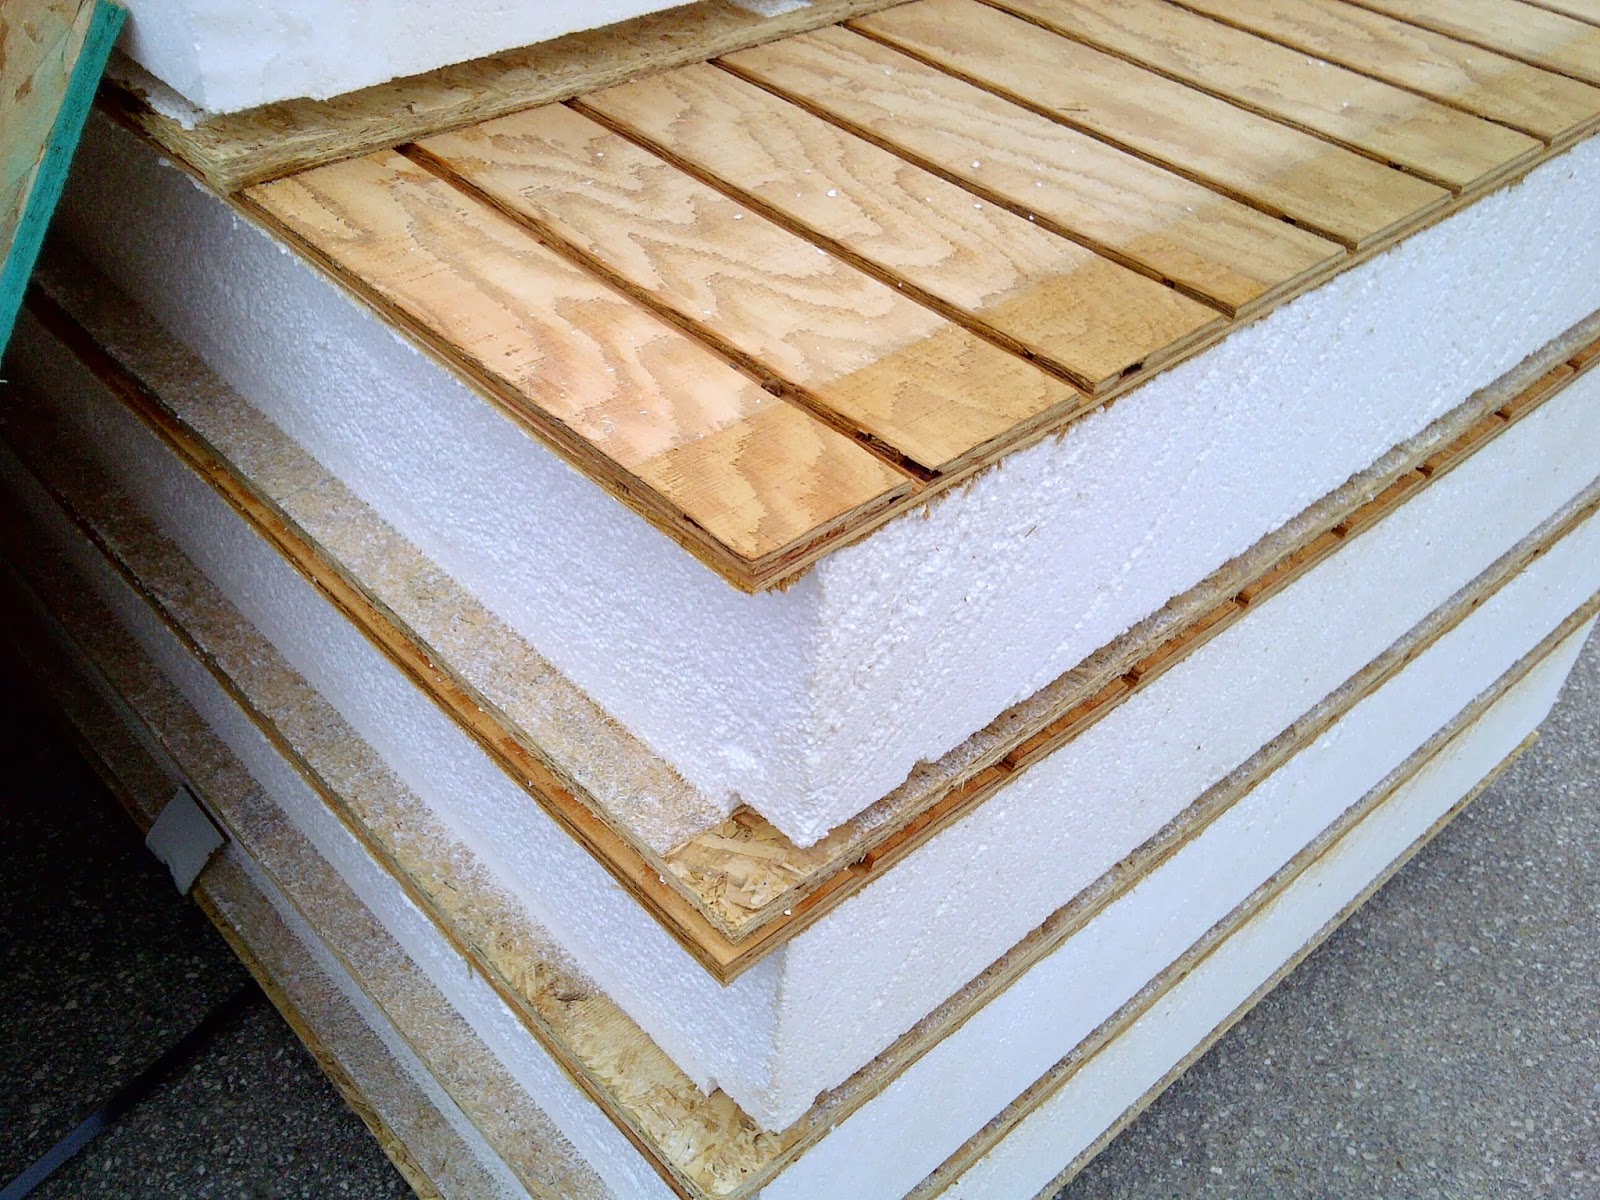 Structural Insulated Panels- Save Money on Energy | Penny Pincher Journal